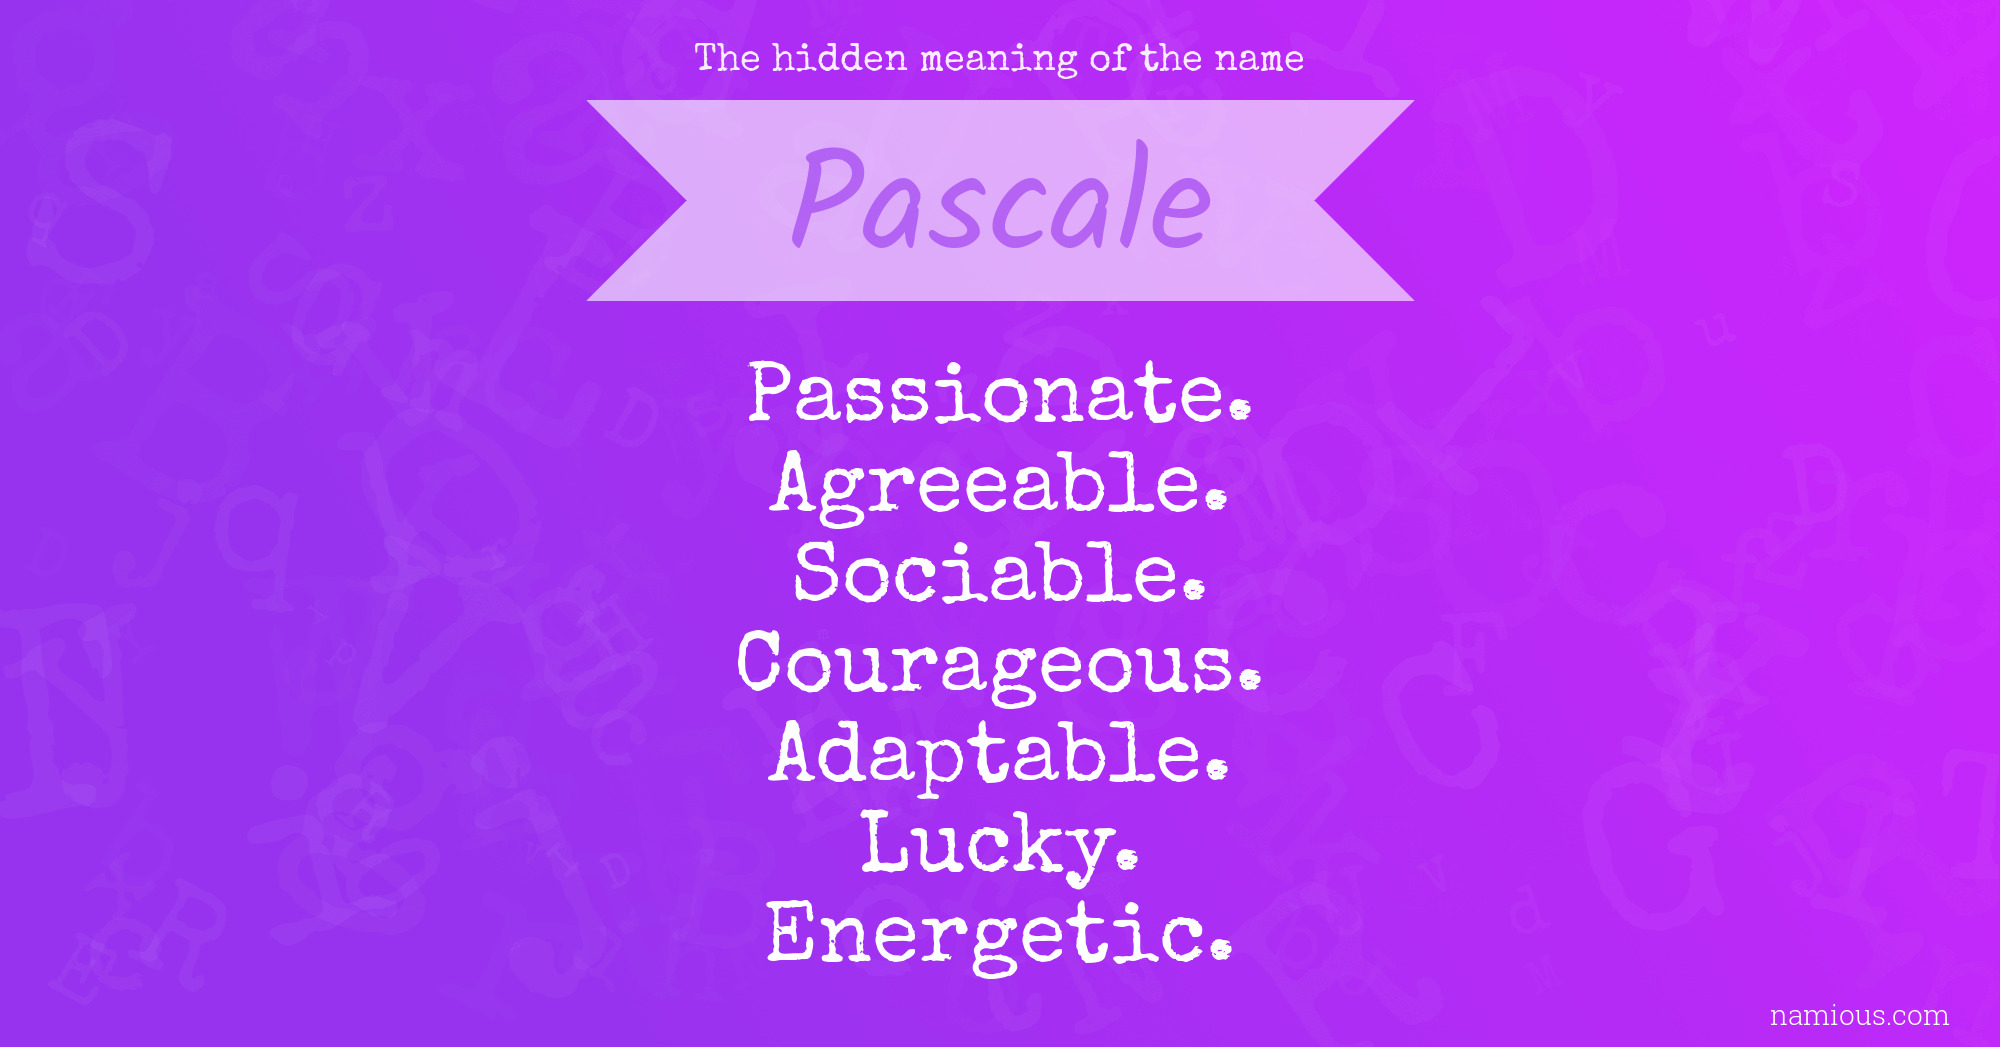 The hidden meaning of the name Pascale